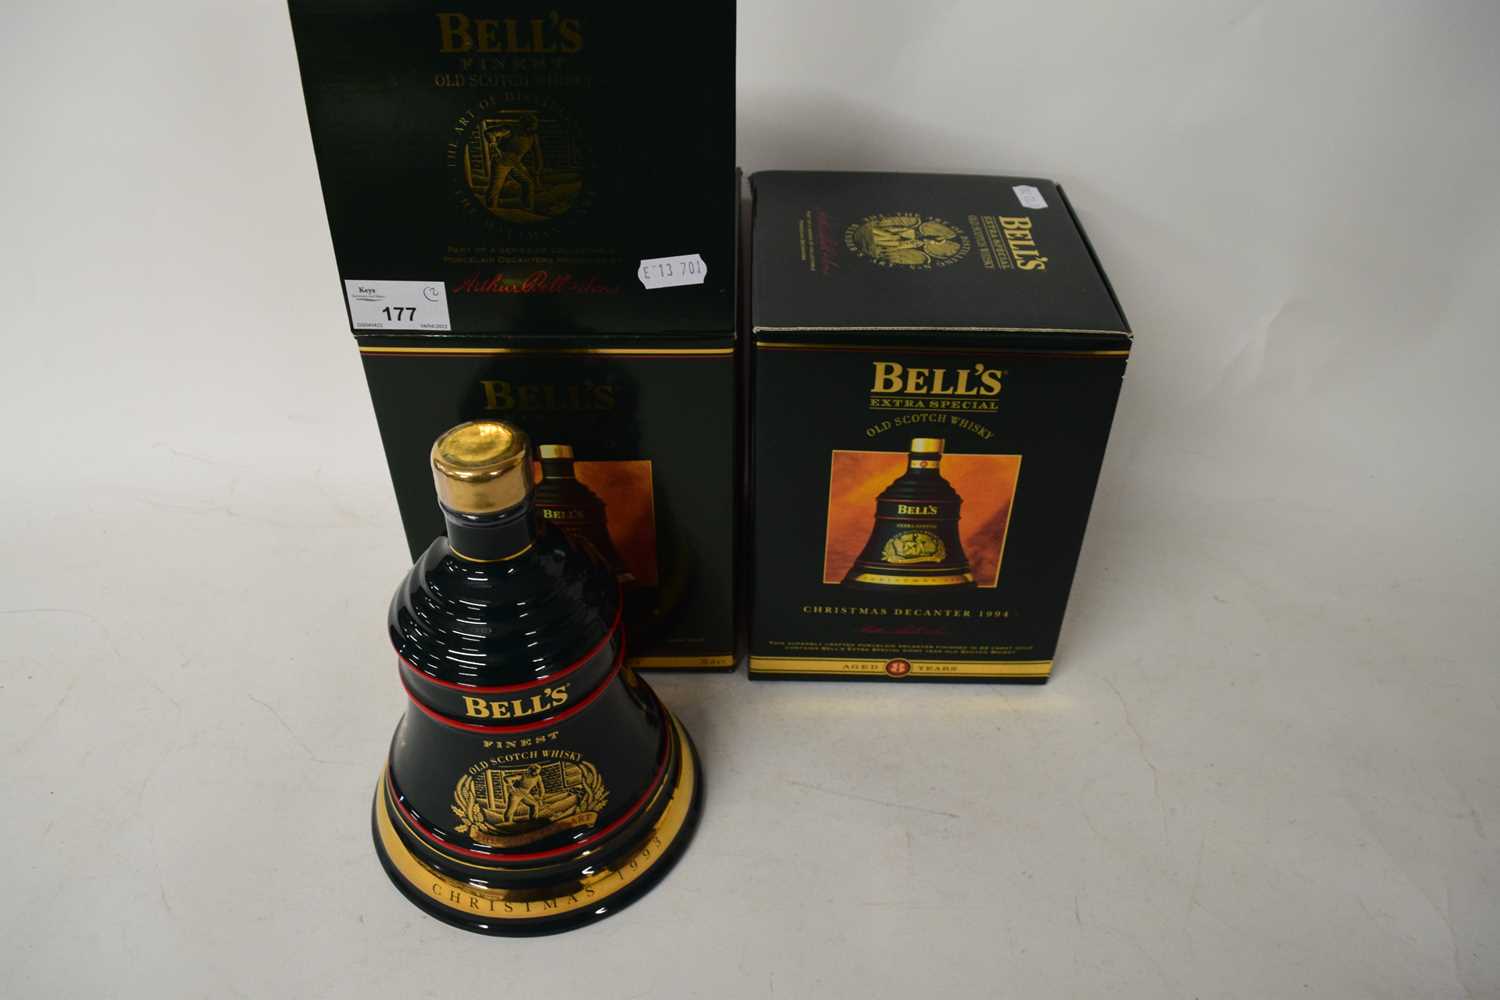 BOXED BELLS FINEST OLD SCOTCH WHISKY AND FURTHER SIMILAR BOX